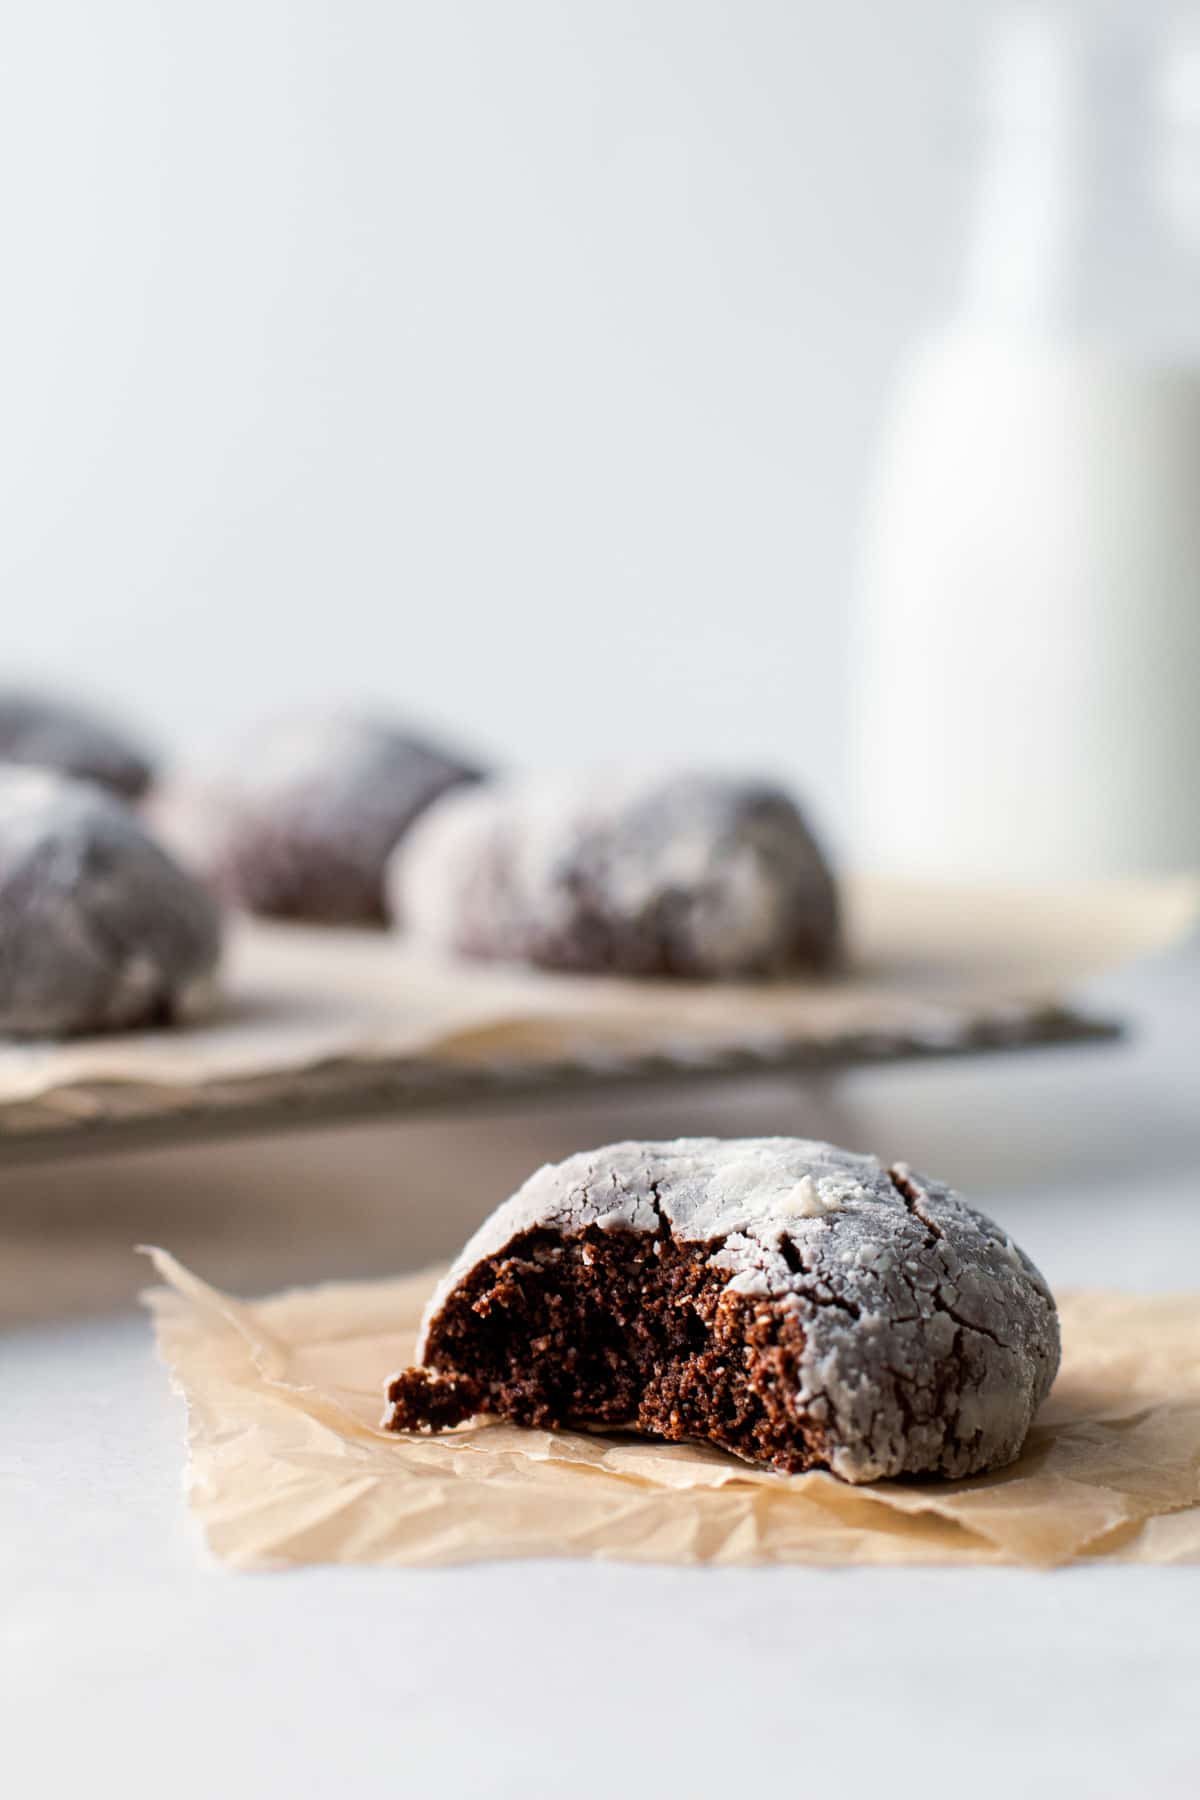 Gluten free chocolate crinkle cookie with a but taken from it.